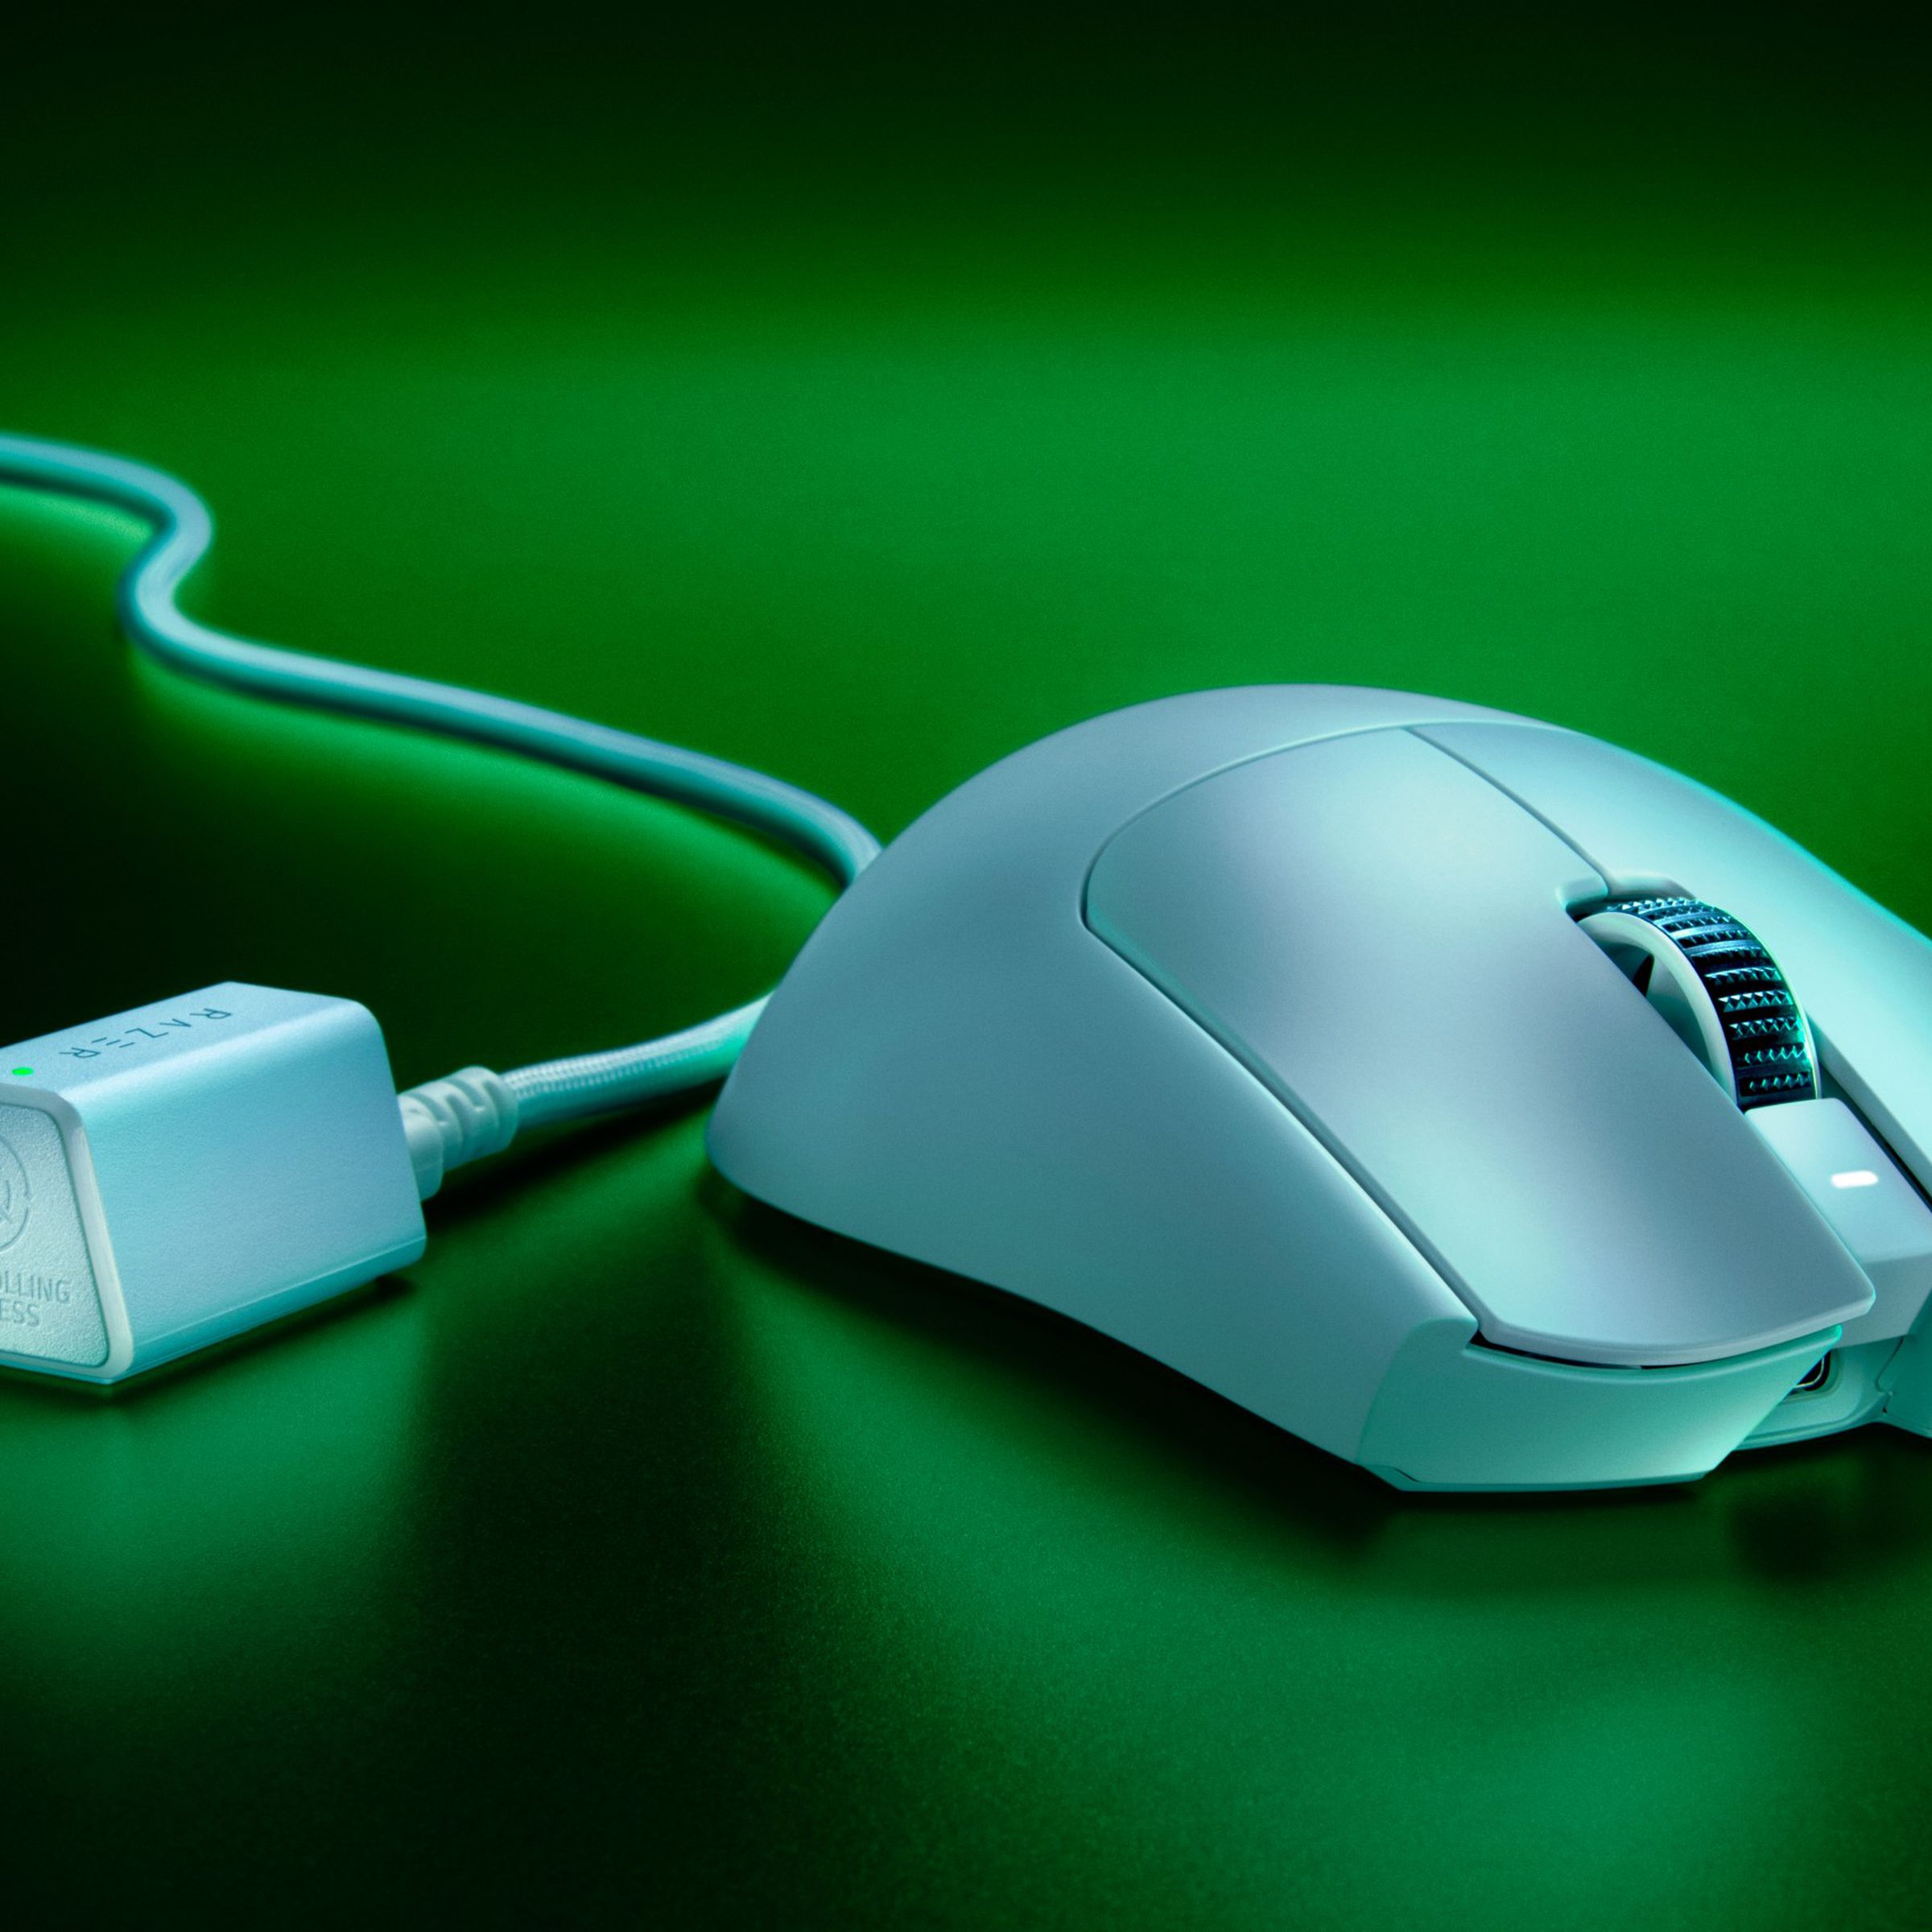 A white mouse with a typical sculpted rounded Razer design, somewhat evoking a hooded snake